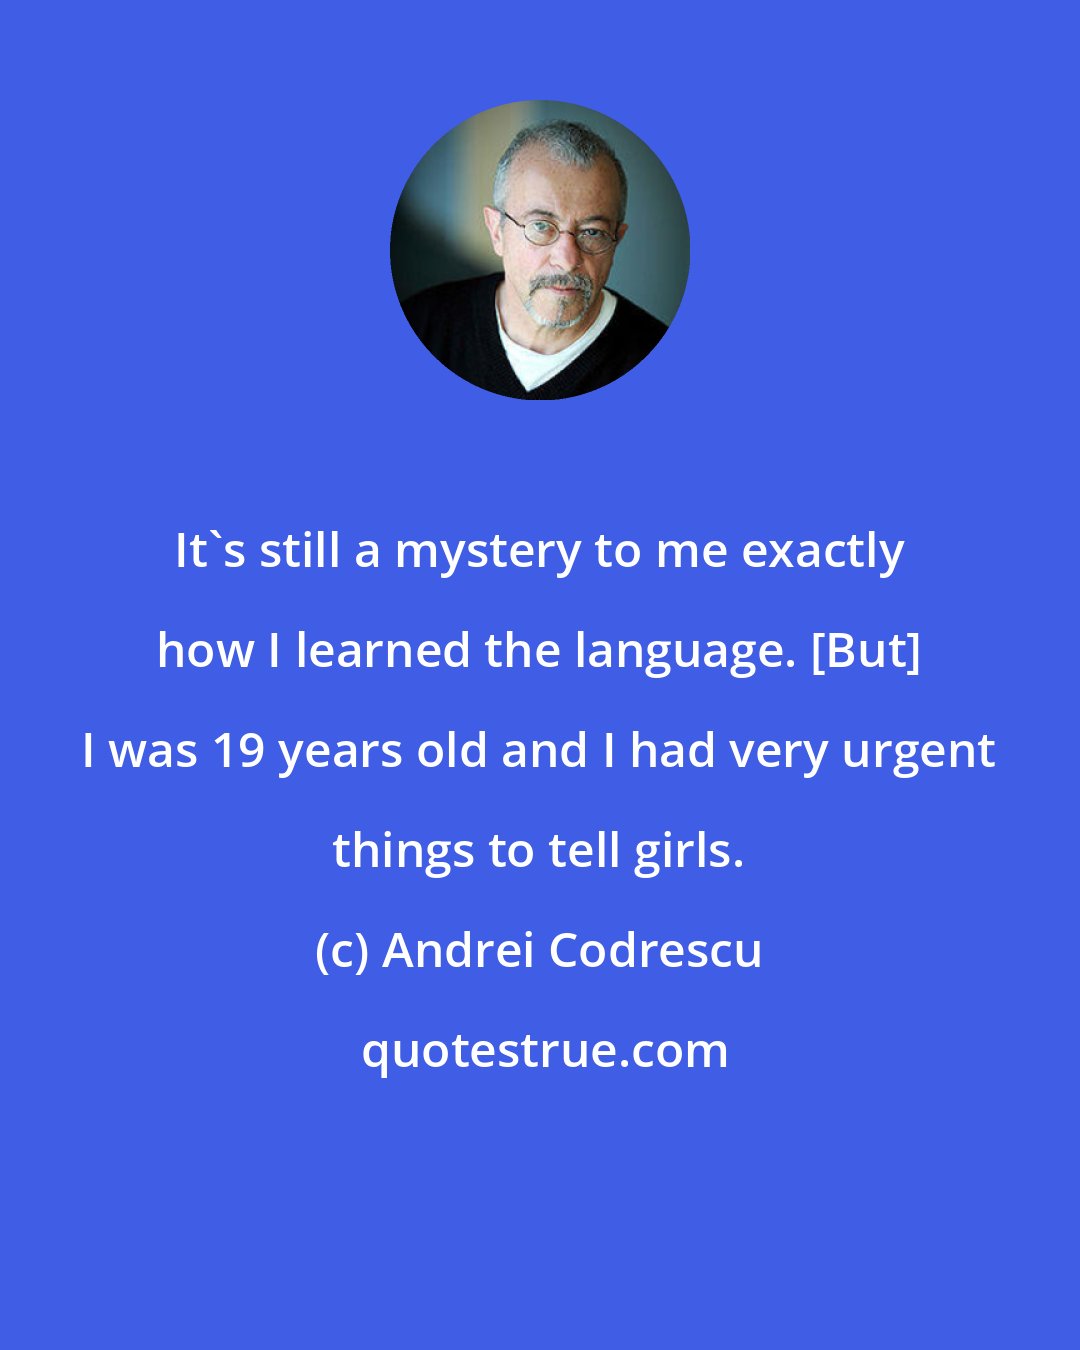 Andrei Codrescu: It's still a mystery to me exactly how I learned the language. [But] I was 19 years old and I had very urgent things to tell girls.